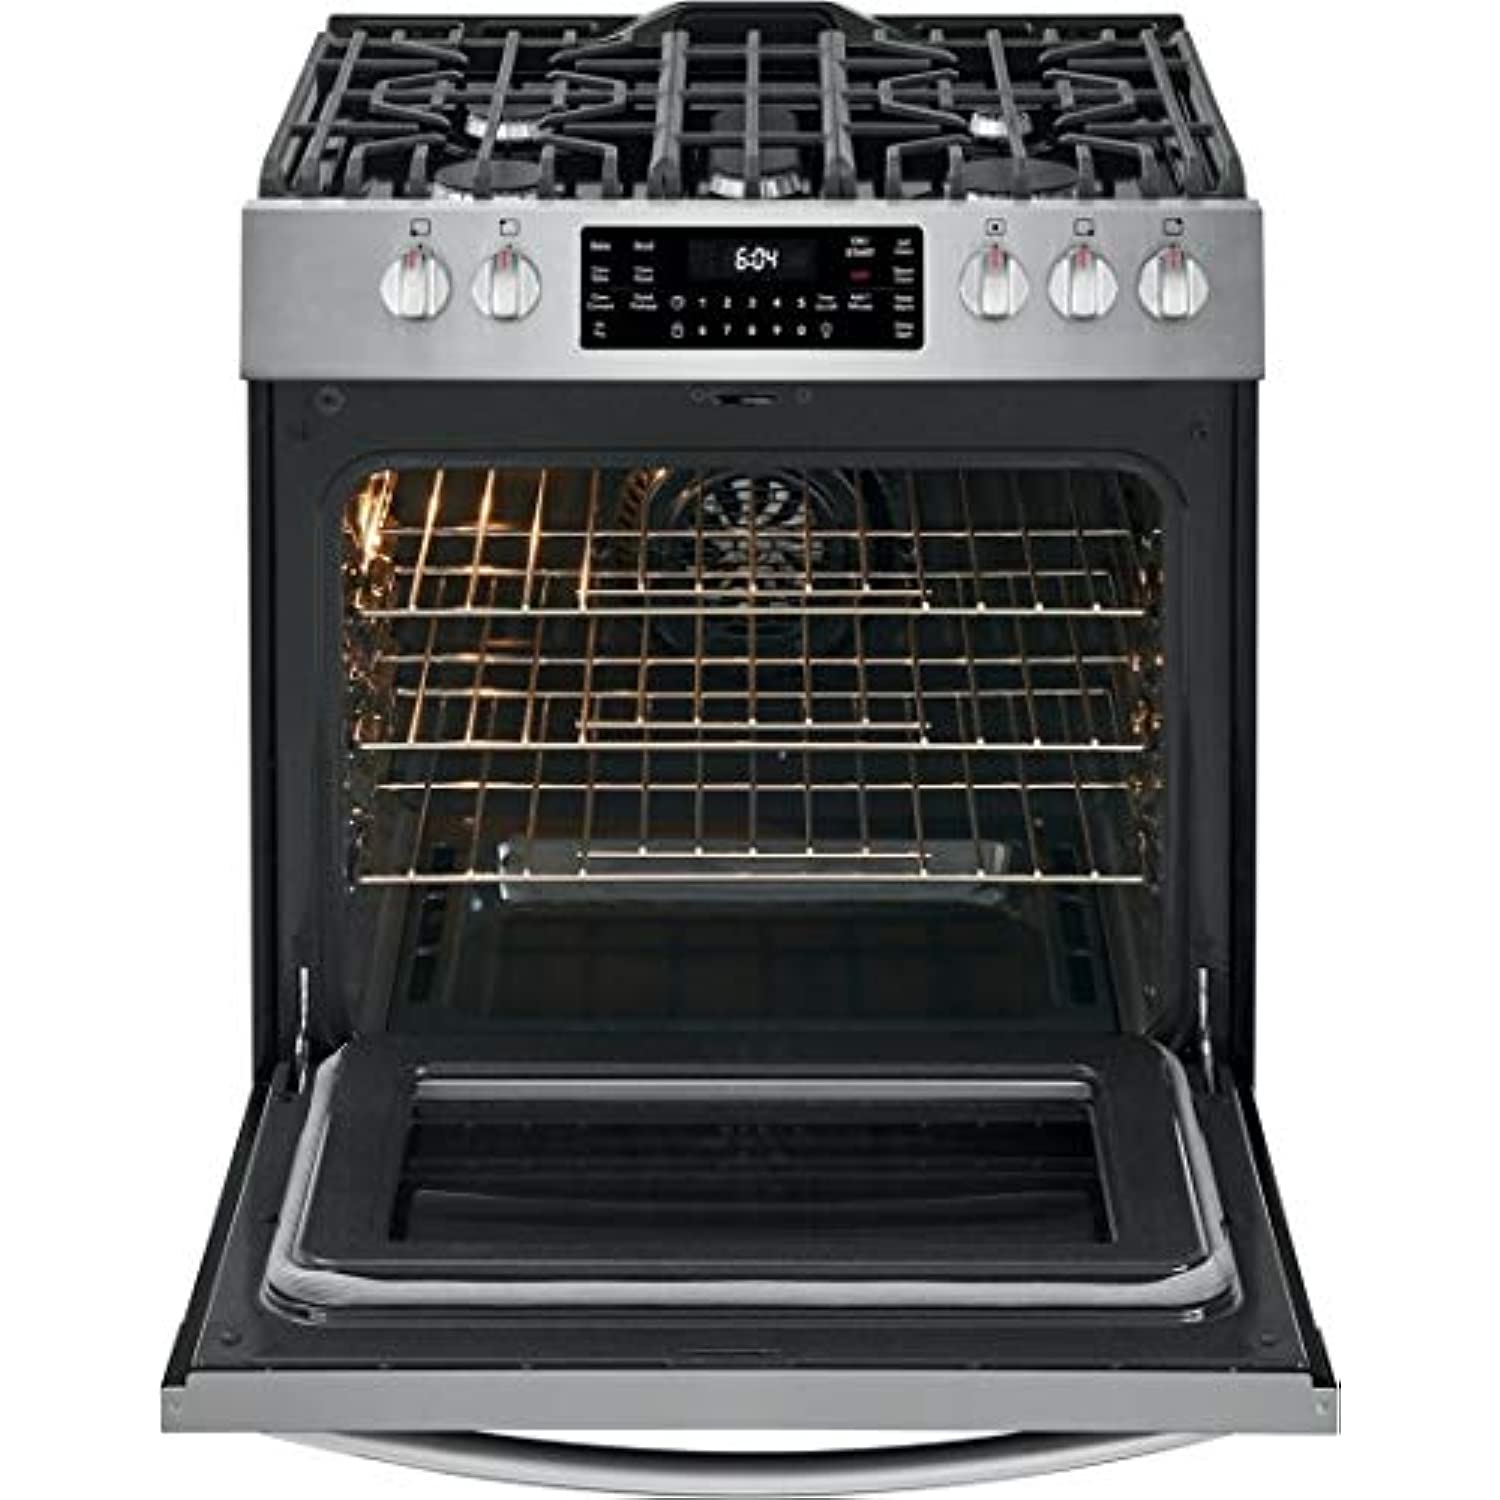 Frigidaire FGGH3047VF 30" Gallery Series Gas Range with 5 Sealed Burners, griddle, True Convection Oven, Self Cleaning, Air Fry Function, in Stainless Steel - image 2 of 10